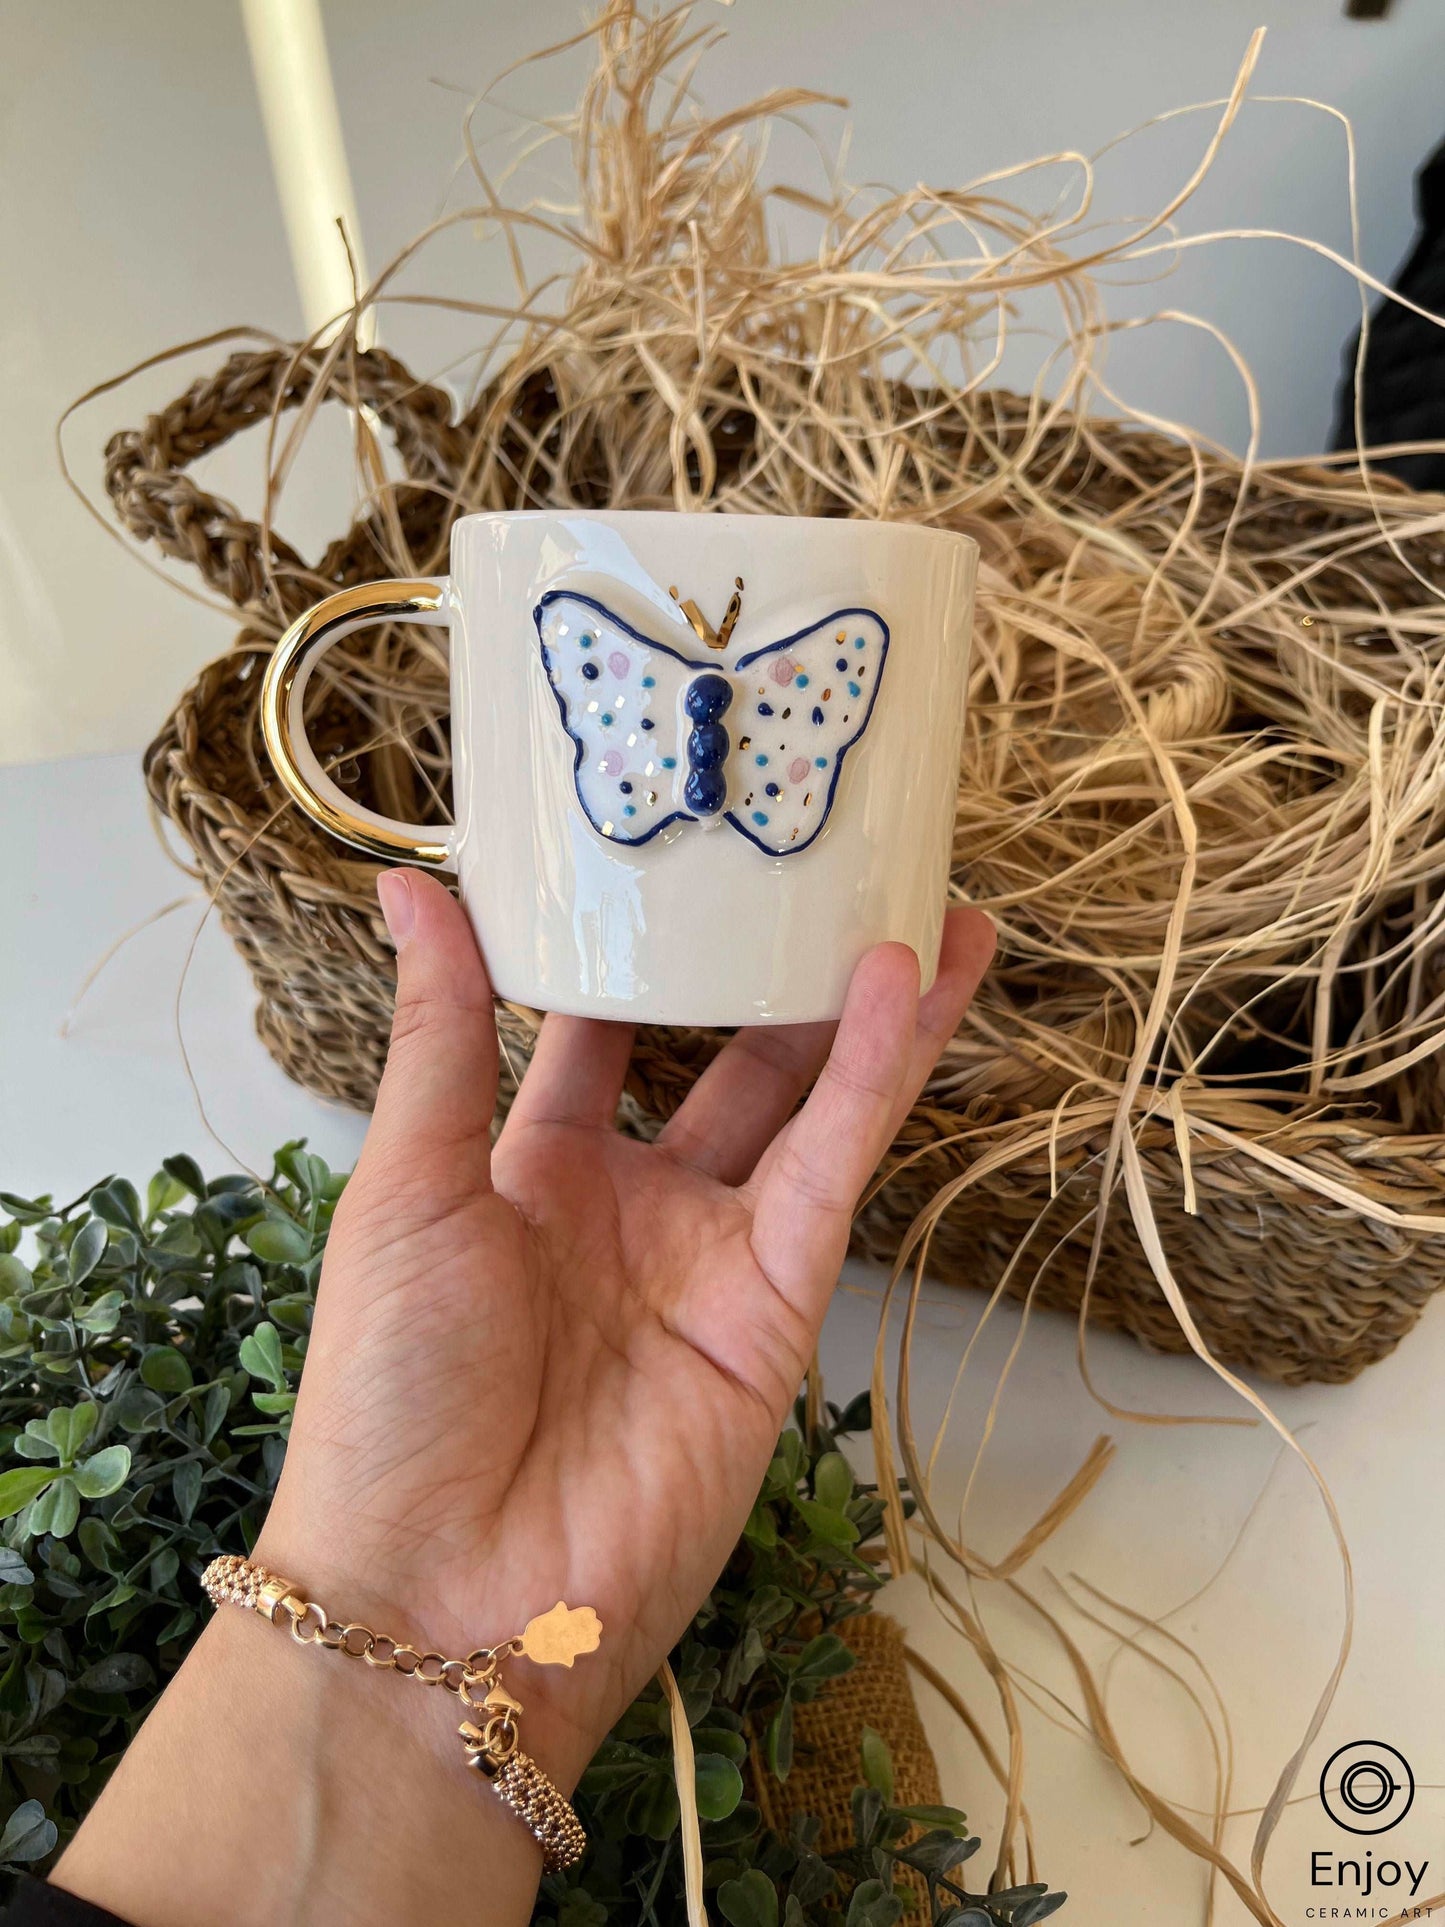 A hand holding a white ceramic mug with a gold handle and a painted blue butterfly, contrasted against a natural backdrop of dried straw and a rustic woven basket, evoking a cozy, artisanal vibe.